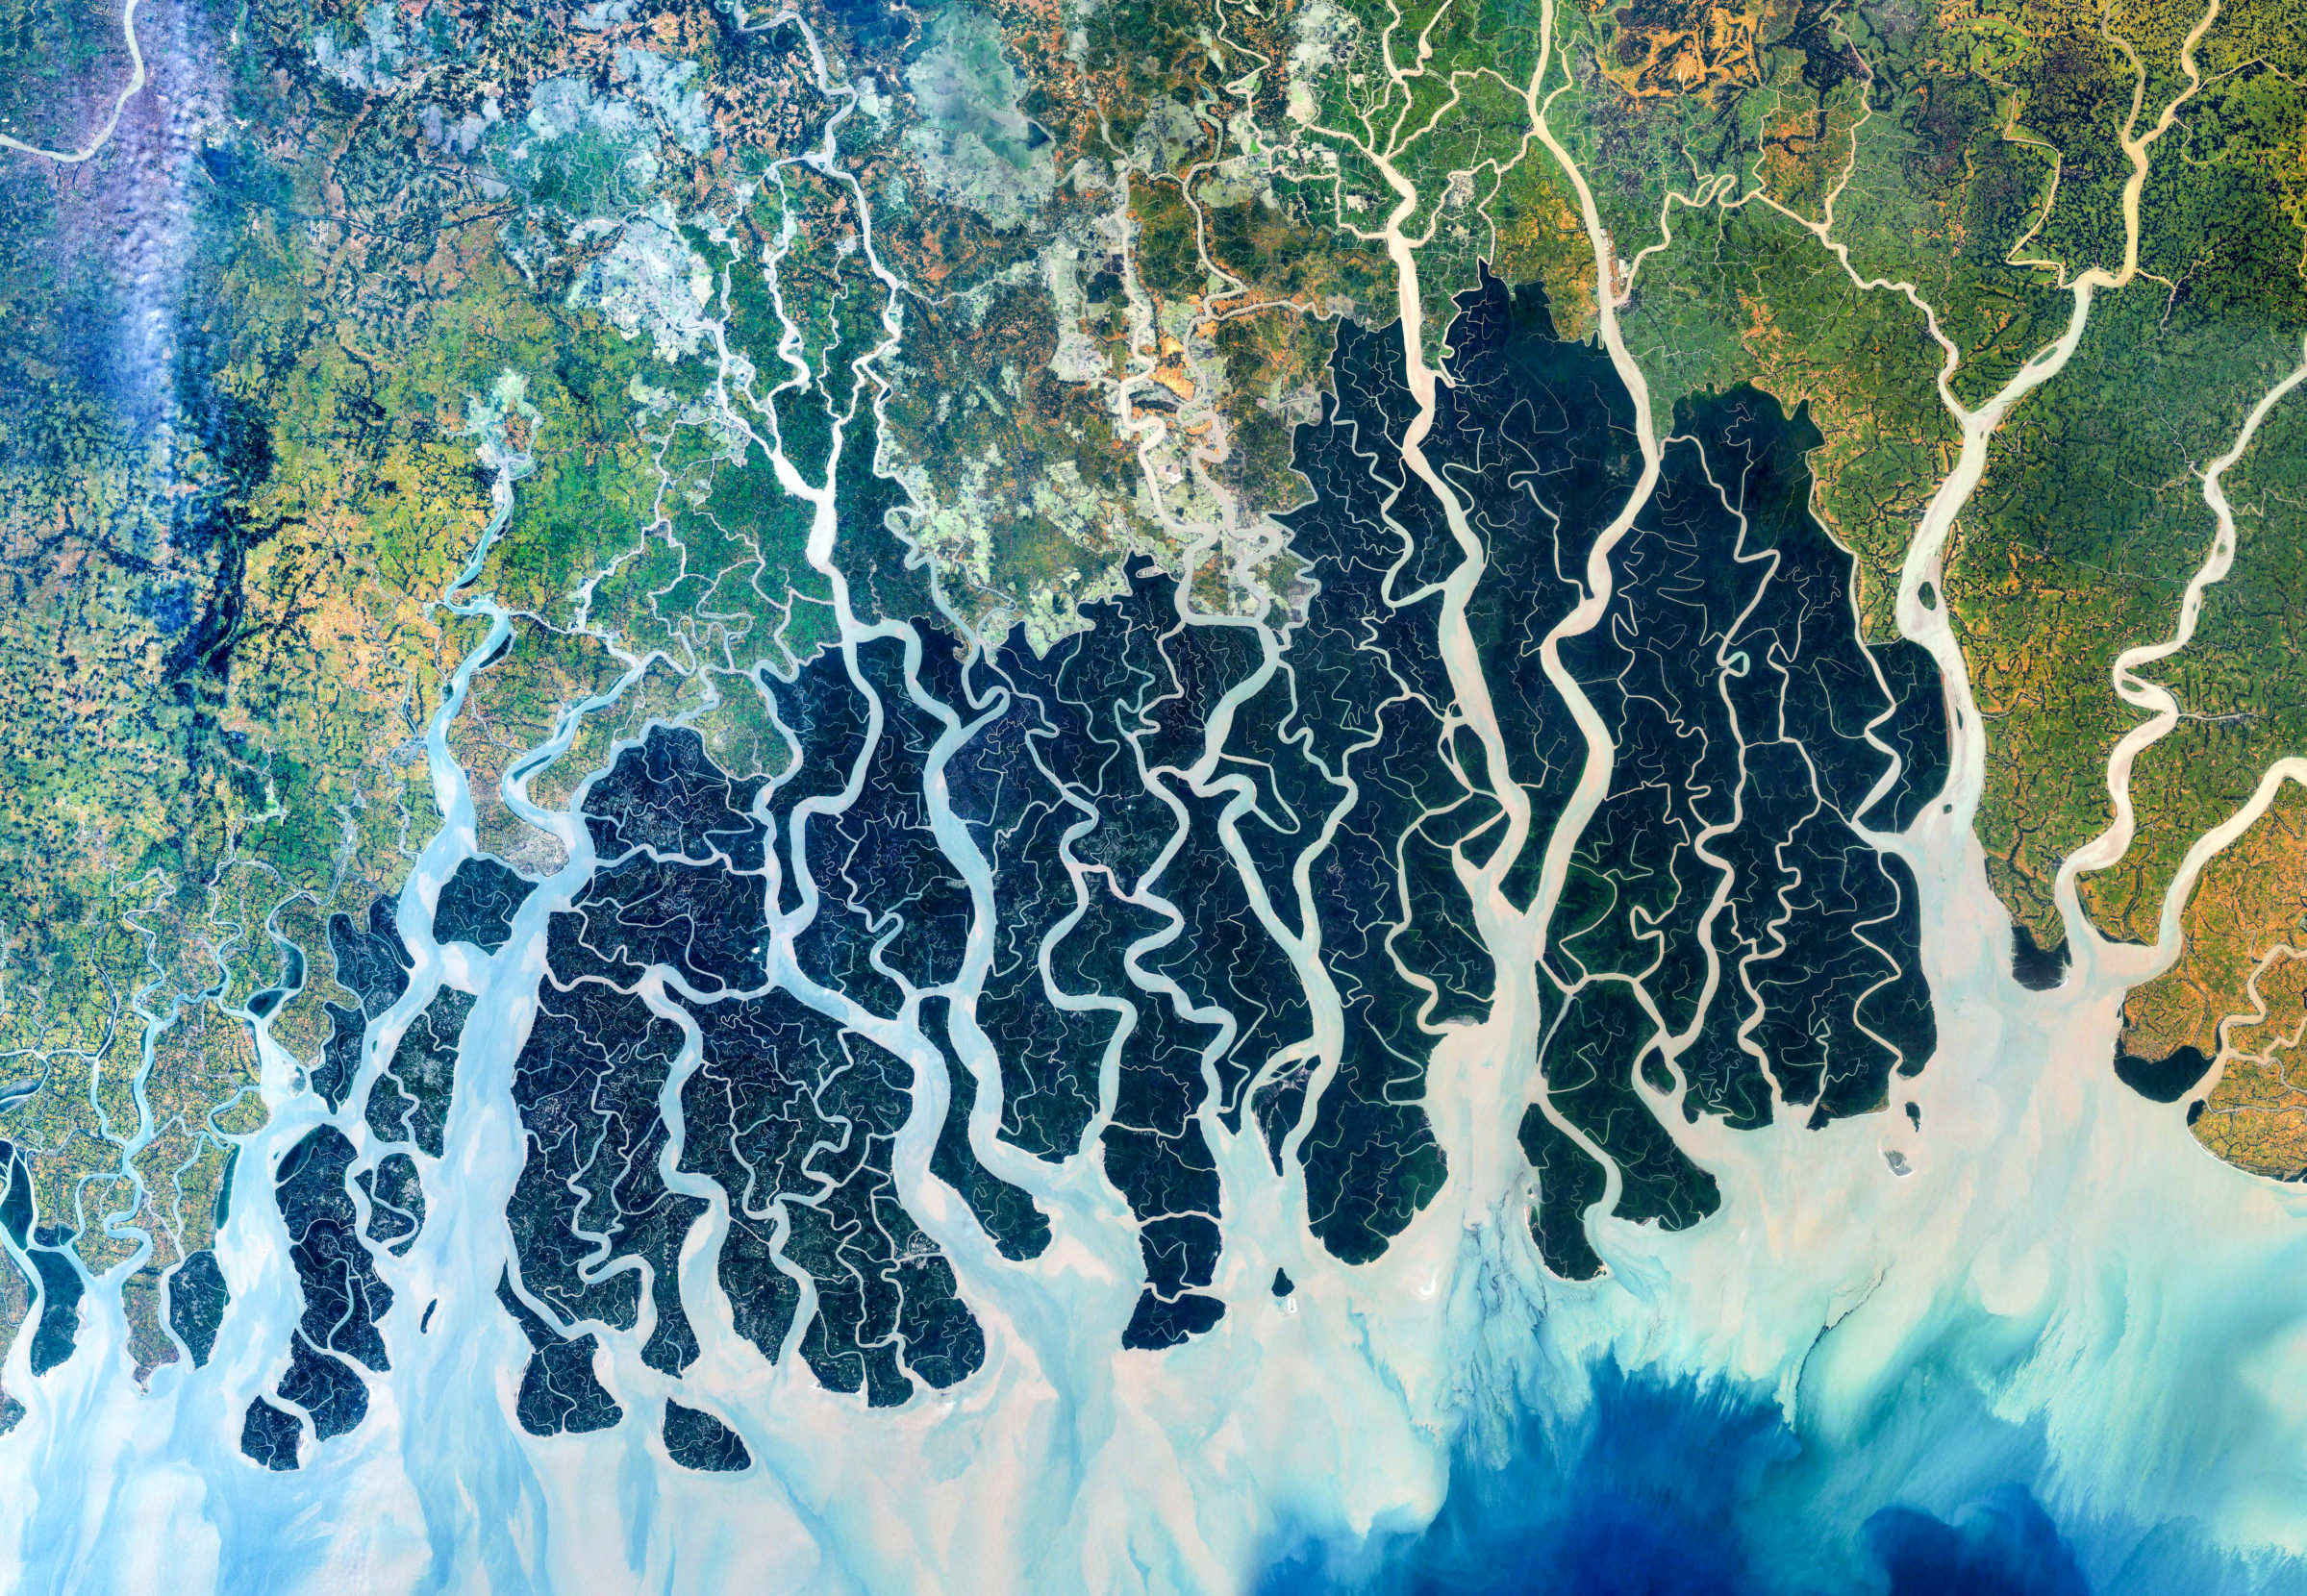 Seen in this merging of satellite imagery taken in 1999 and 2000, the Sundarbans appears like an intricate tapestry. Here where the Ganges, Brahmaputra, and Meghna Rivers meet at the edge of the Bay of Bengal stands one of the world's largest remaining tract of mangrove forest — a natural wall protecting the coasts of India and Bangladesh and providing a rich habitat for endangered Bengal tigers, hundreds of bird species, and an array of sharks and rays. Recent research shows that a quarter of its trees exhibit signs of declining health. Photo: B.A.E. Inc./Alamy.